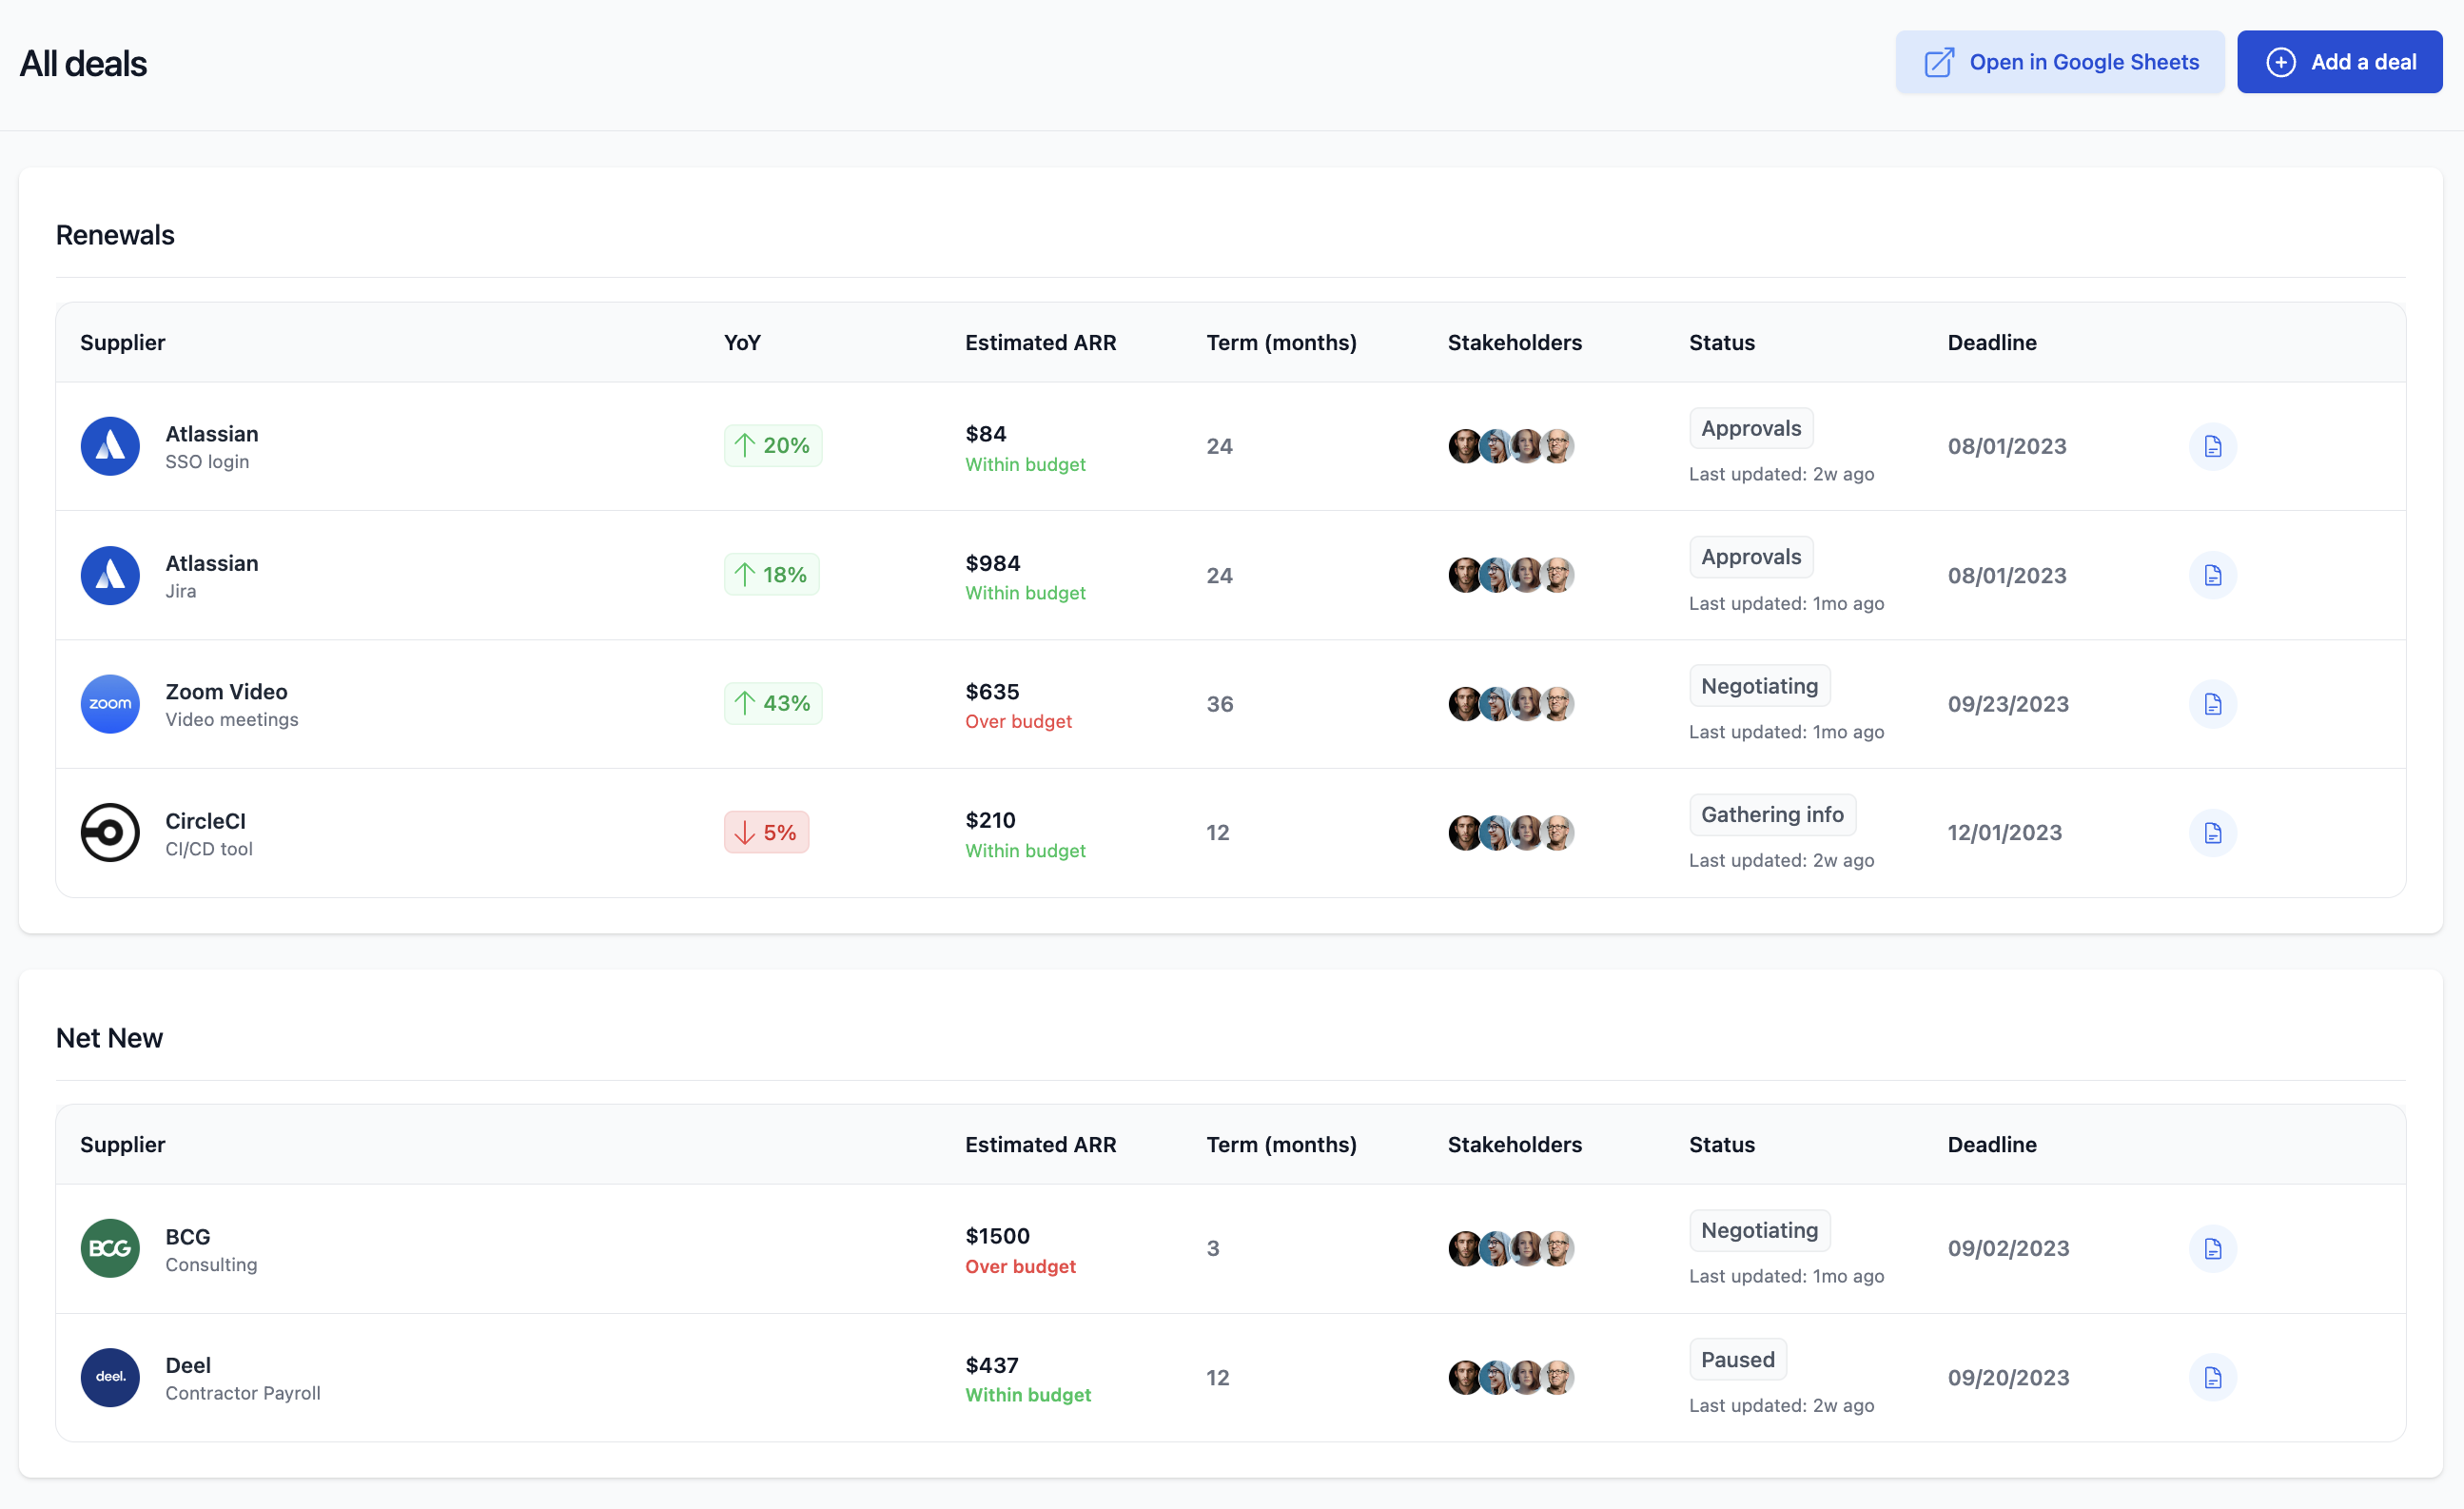 Deal Tracker: Dashboard tracks renewals and net new deals with ARR, stakeholders, deadlines and contract term metrics.